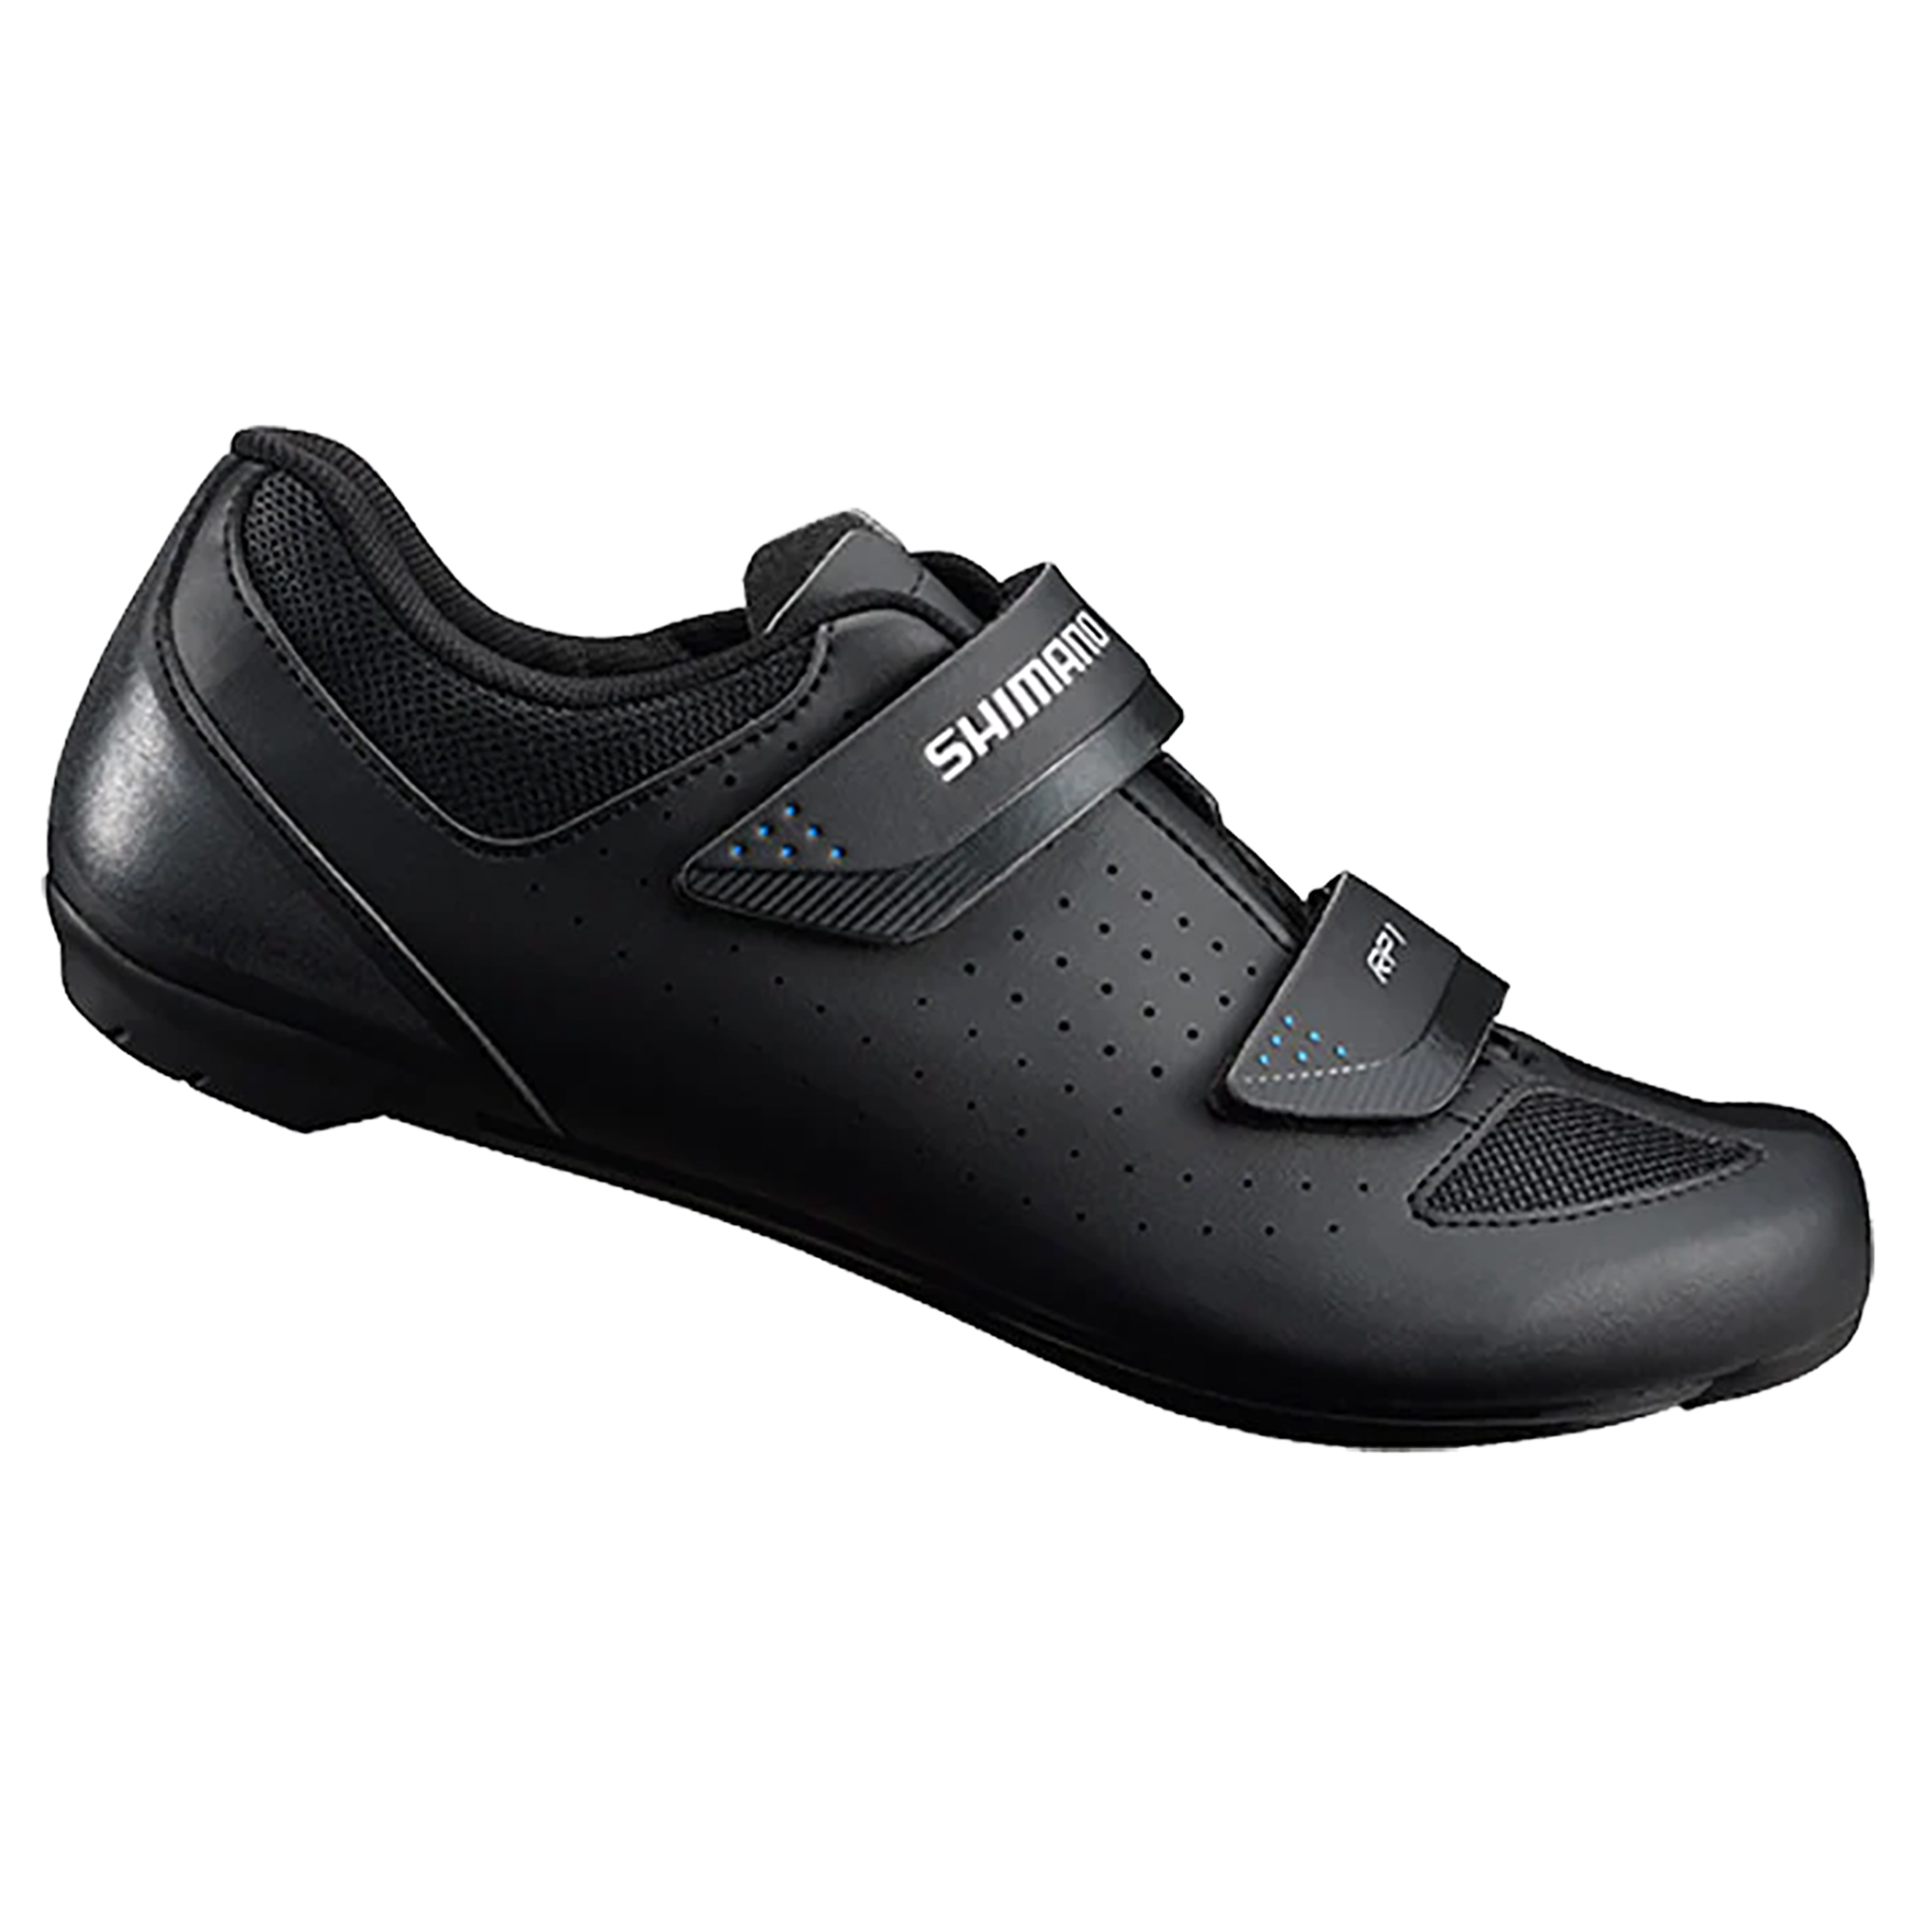 Shimano RP1 Road Bicycle Shoes For SPD SL Black Size 48